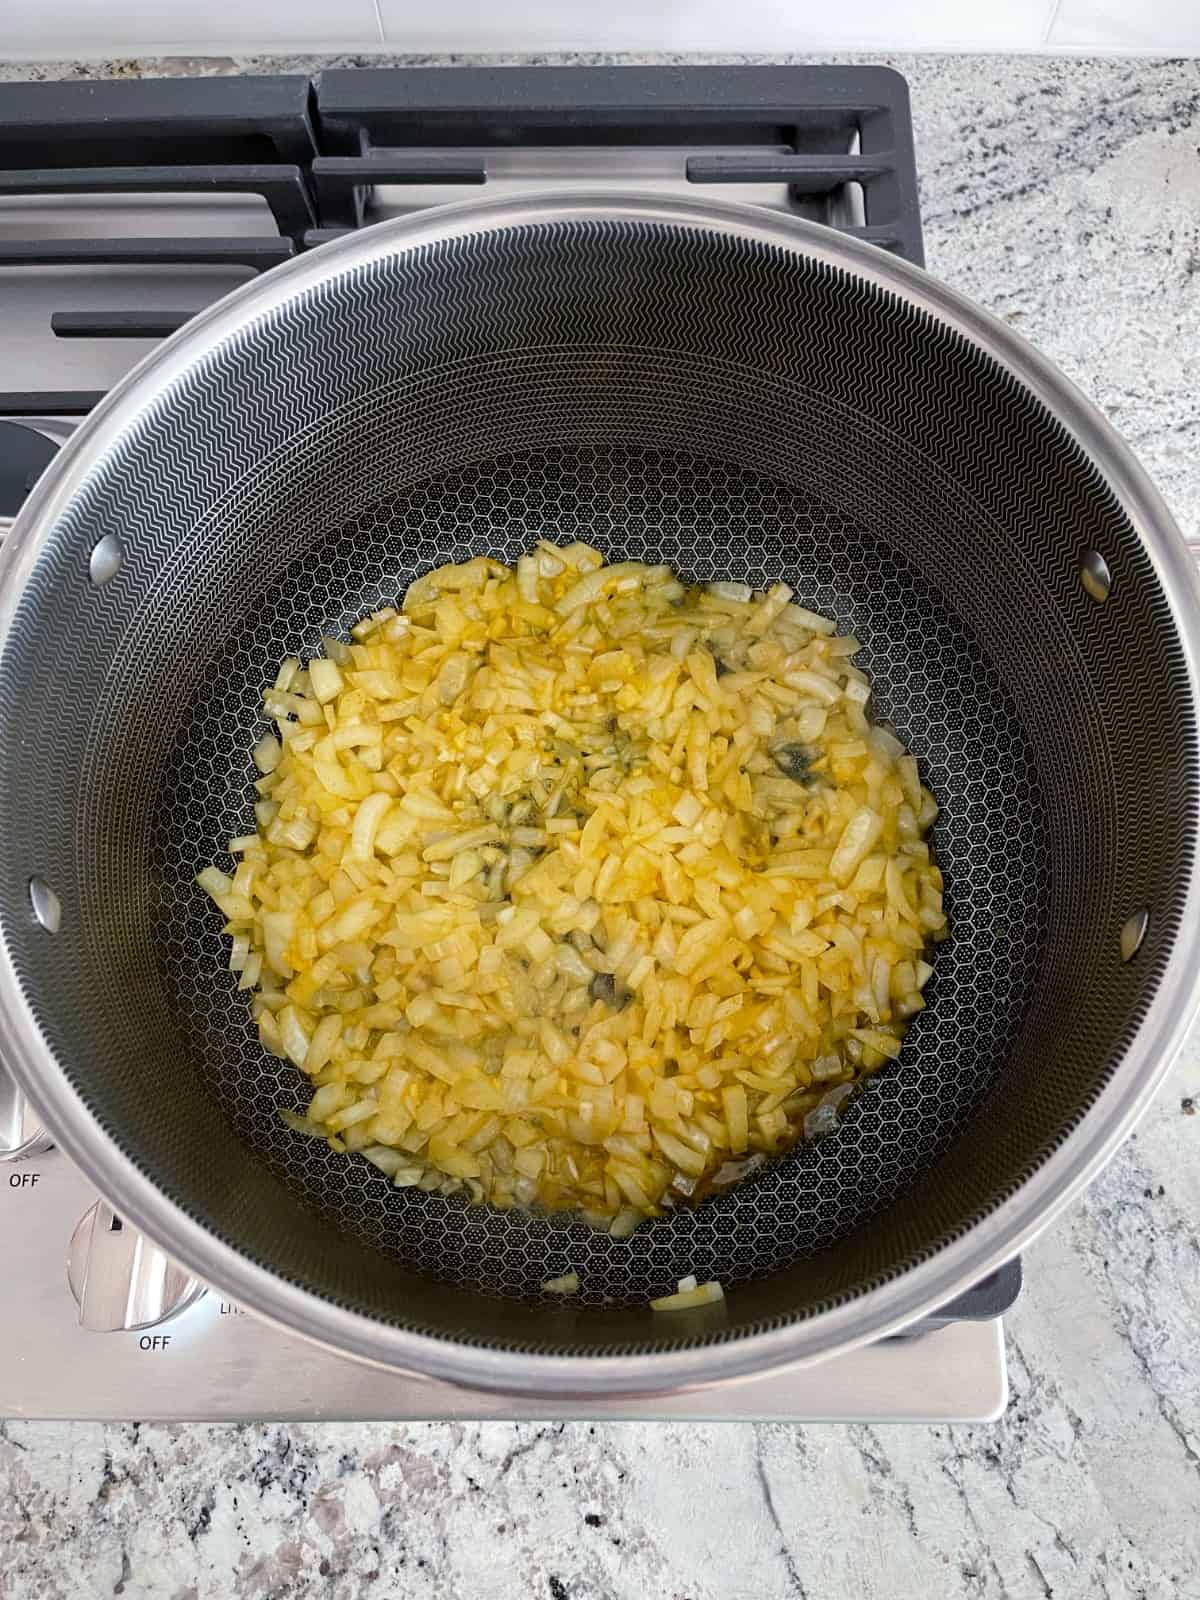 Sauteeing onions, ginger and turmeric in coconut oil on stovetop